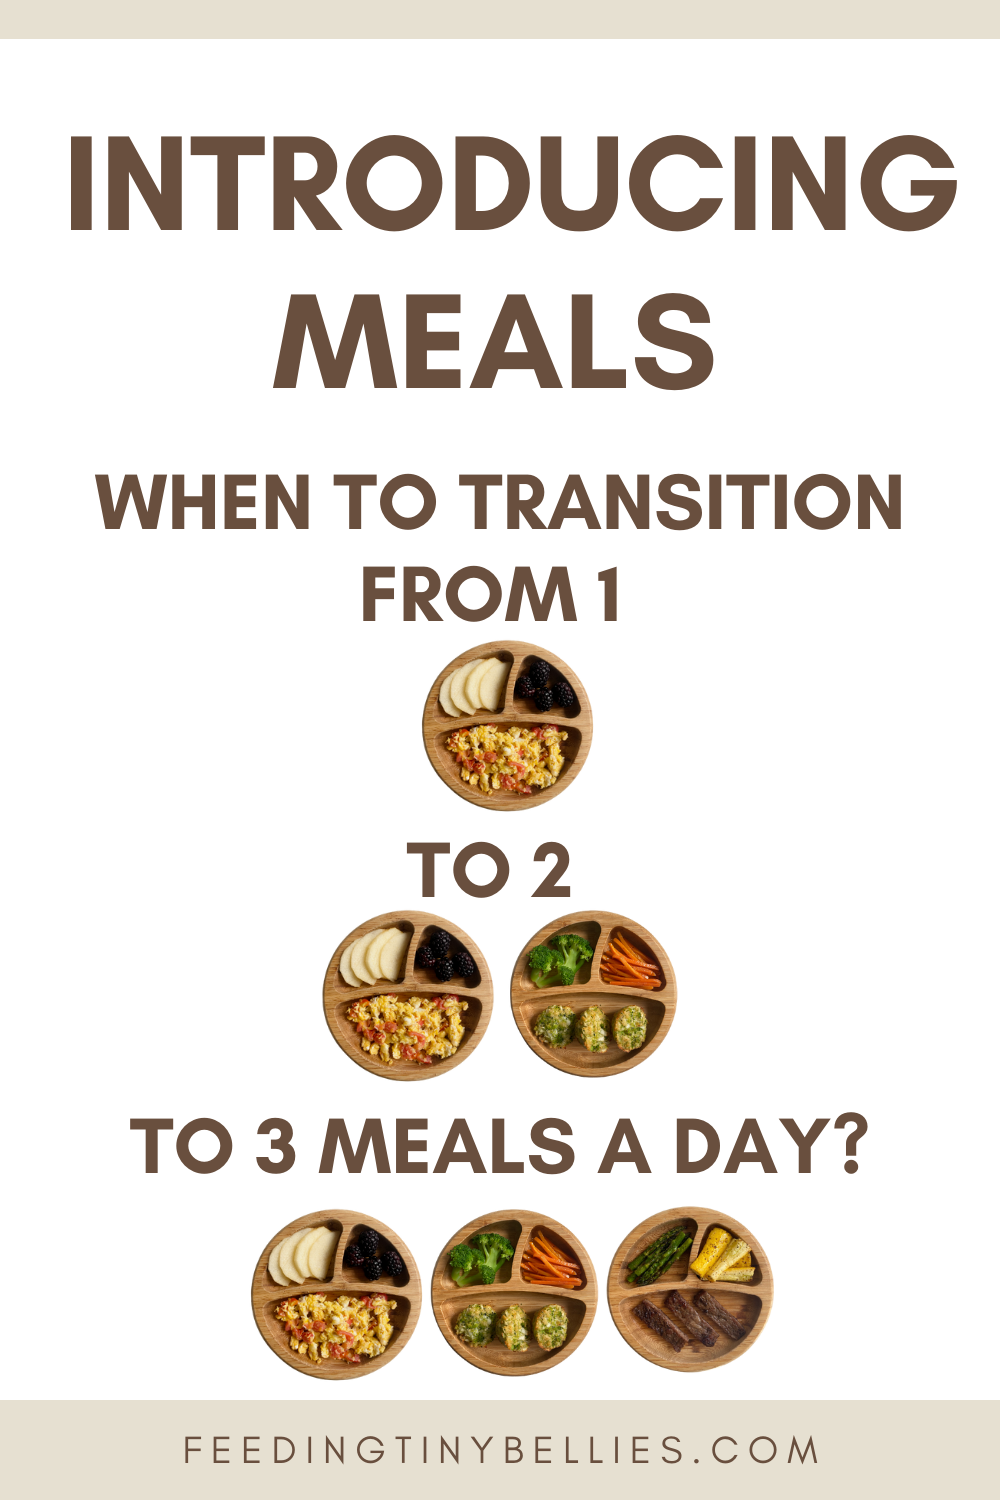 Introducing meals - When to transition from 1 to 2 to 3 meals a day?